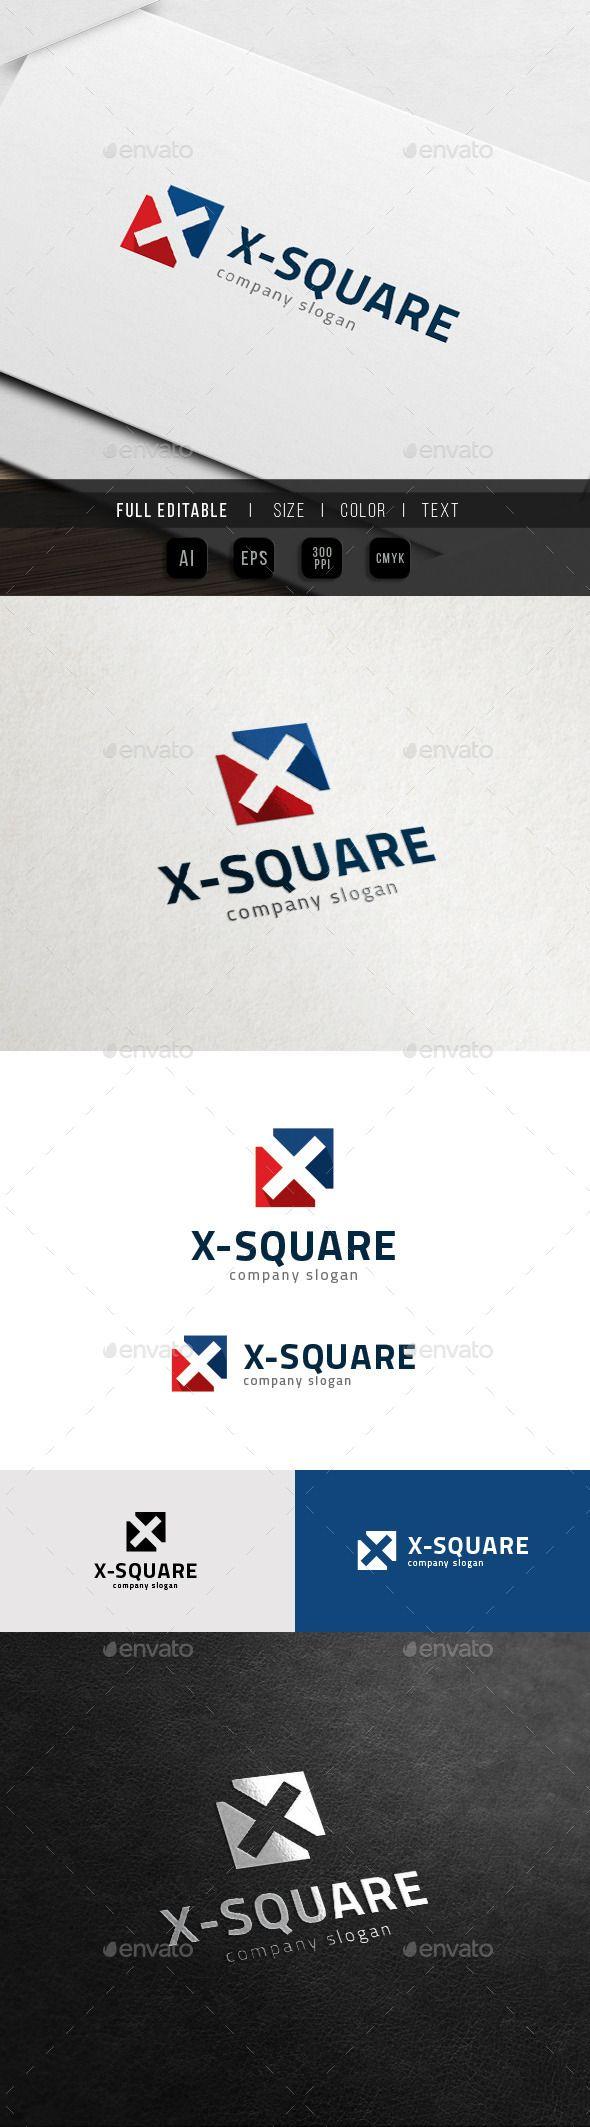 Square Letter a Logo - Pin by Bashooka Web & Graphic Design on Game Logo Template | Logos ...